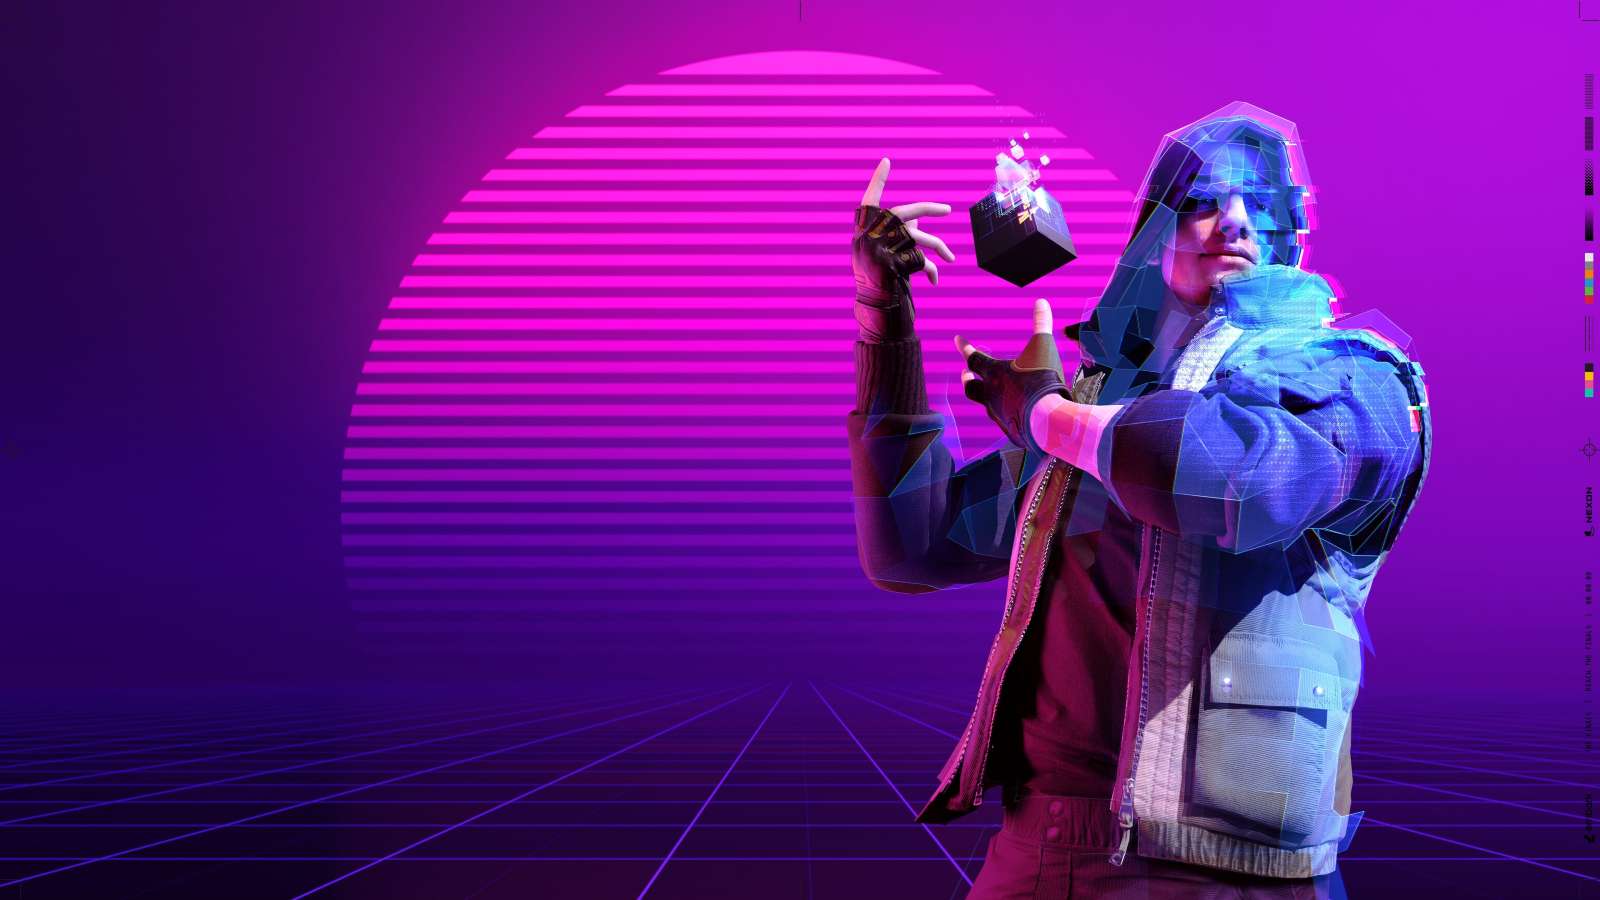 The Final Season 2 key art showing a glitchy player on neon background.